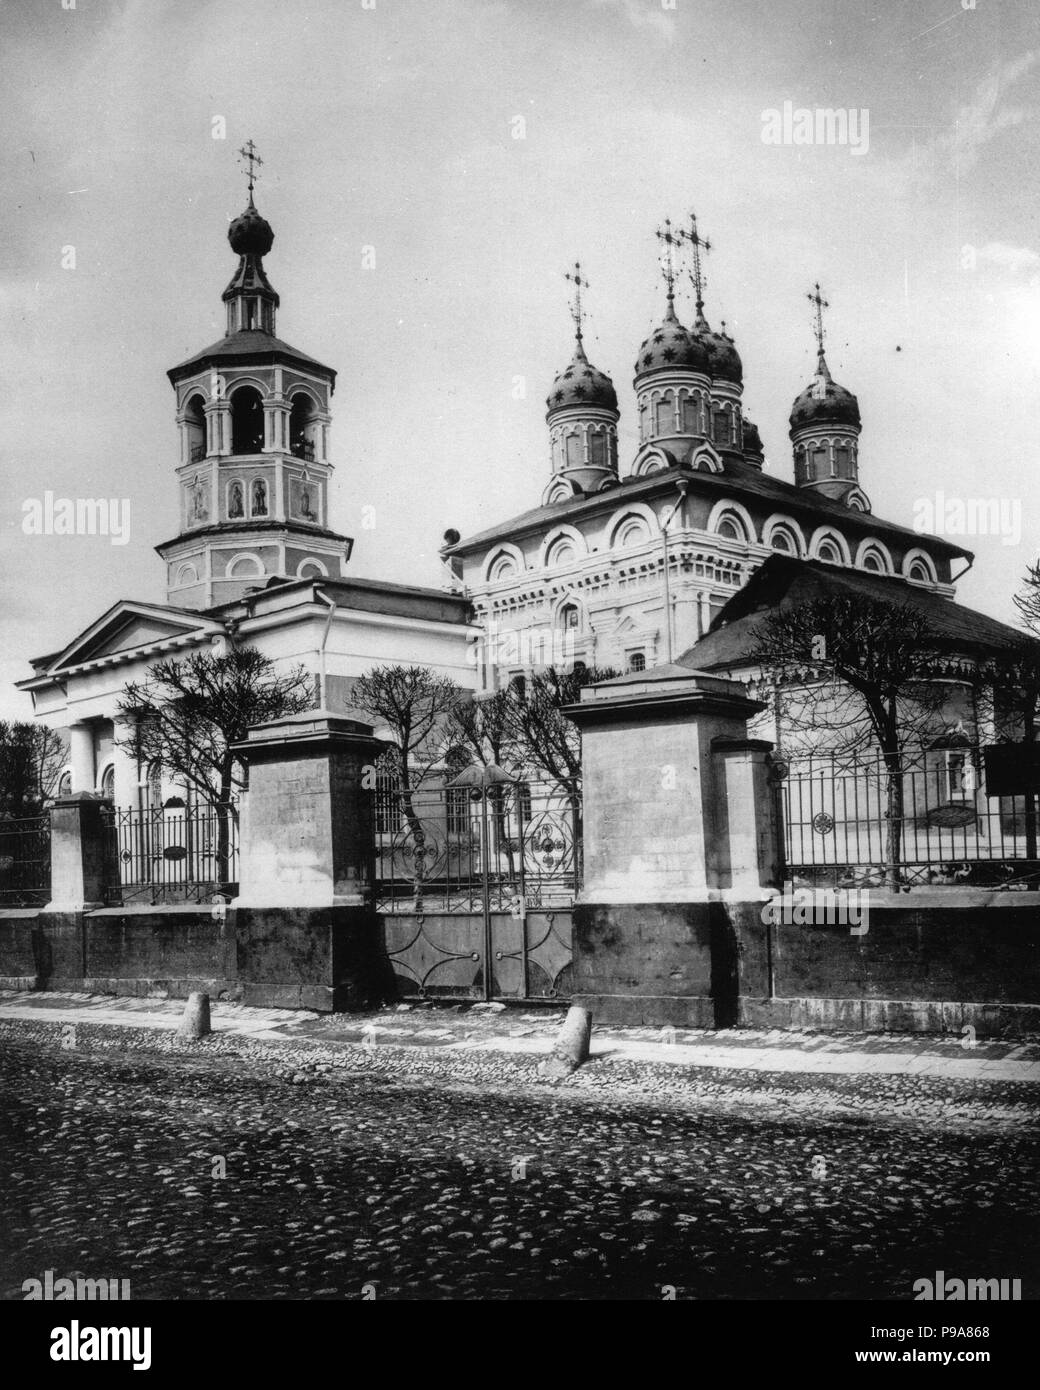 The Church of Saint Chariton the Confessor at Ogorodniki in Moscow ...